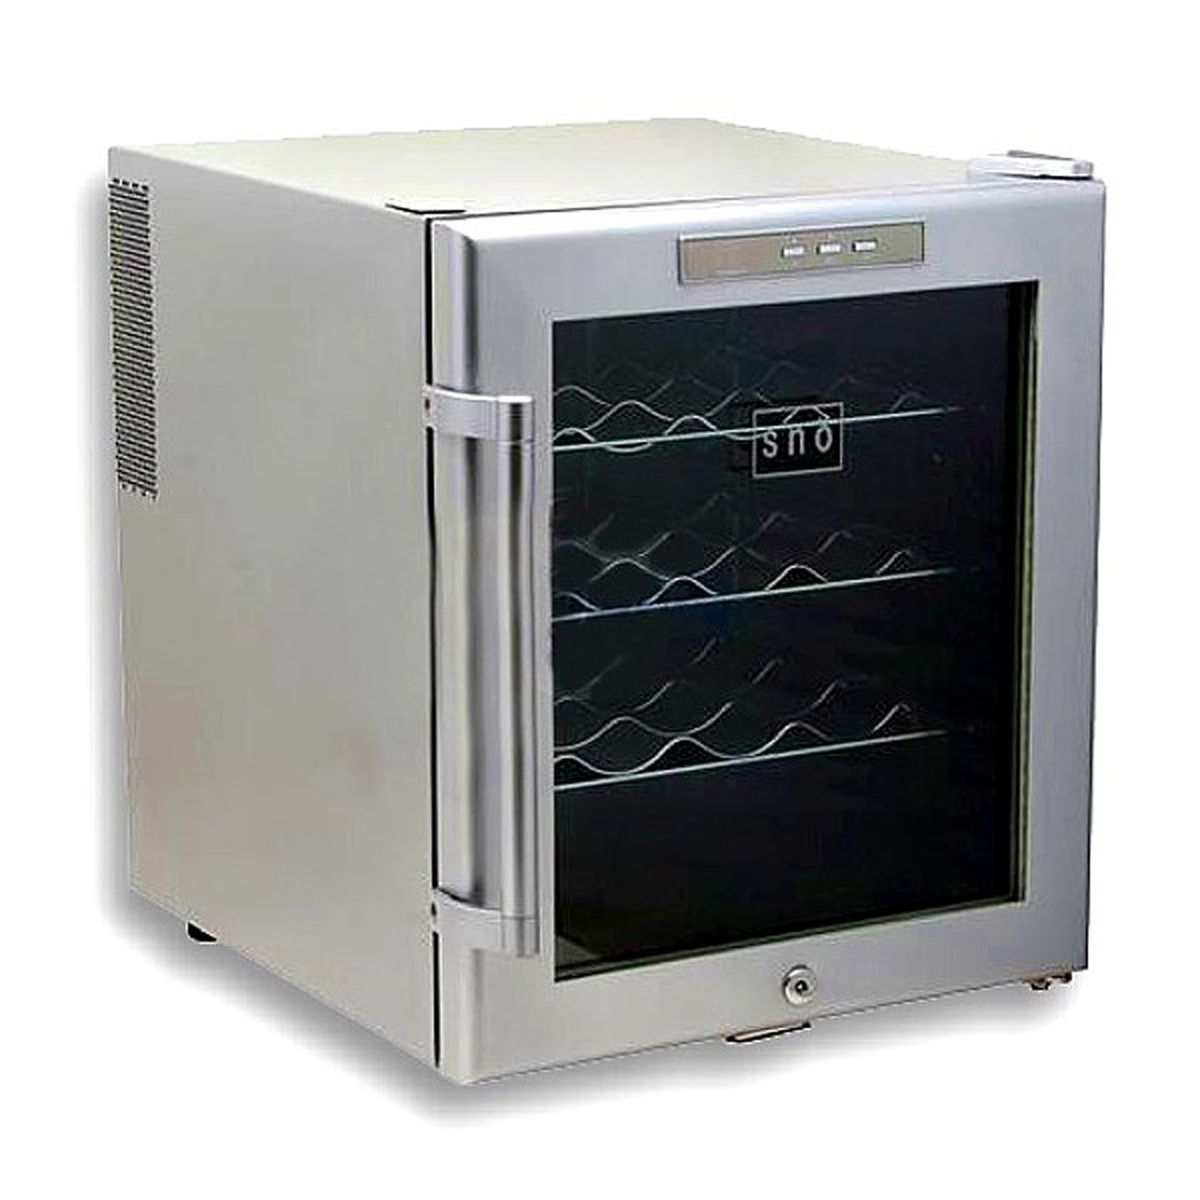 Whynter WC-16S Thermoelectric 16-Bottle Wine Cooler - Platinum